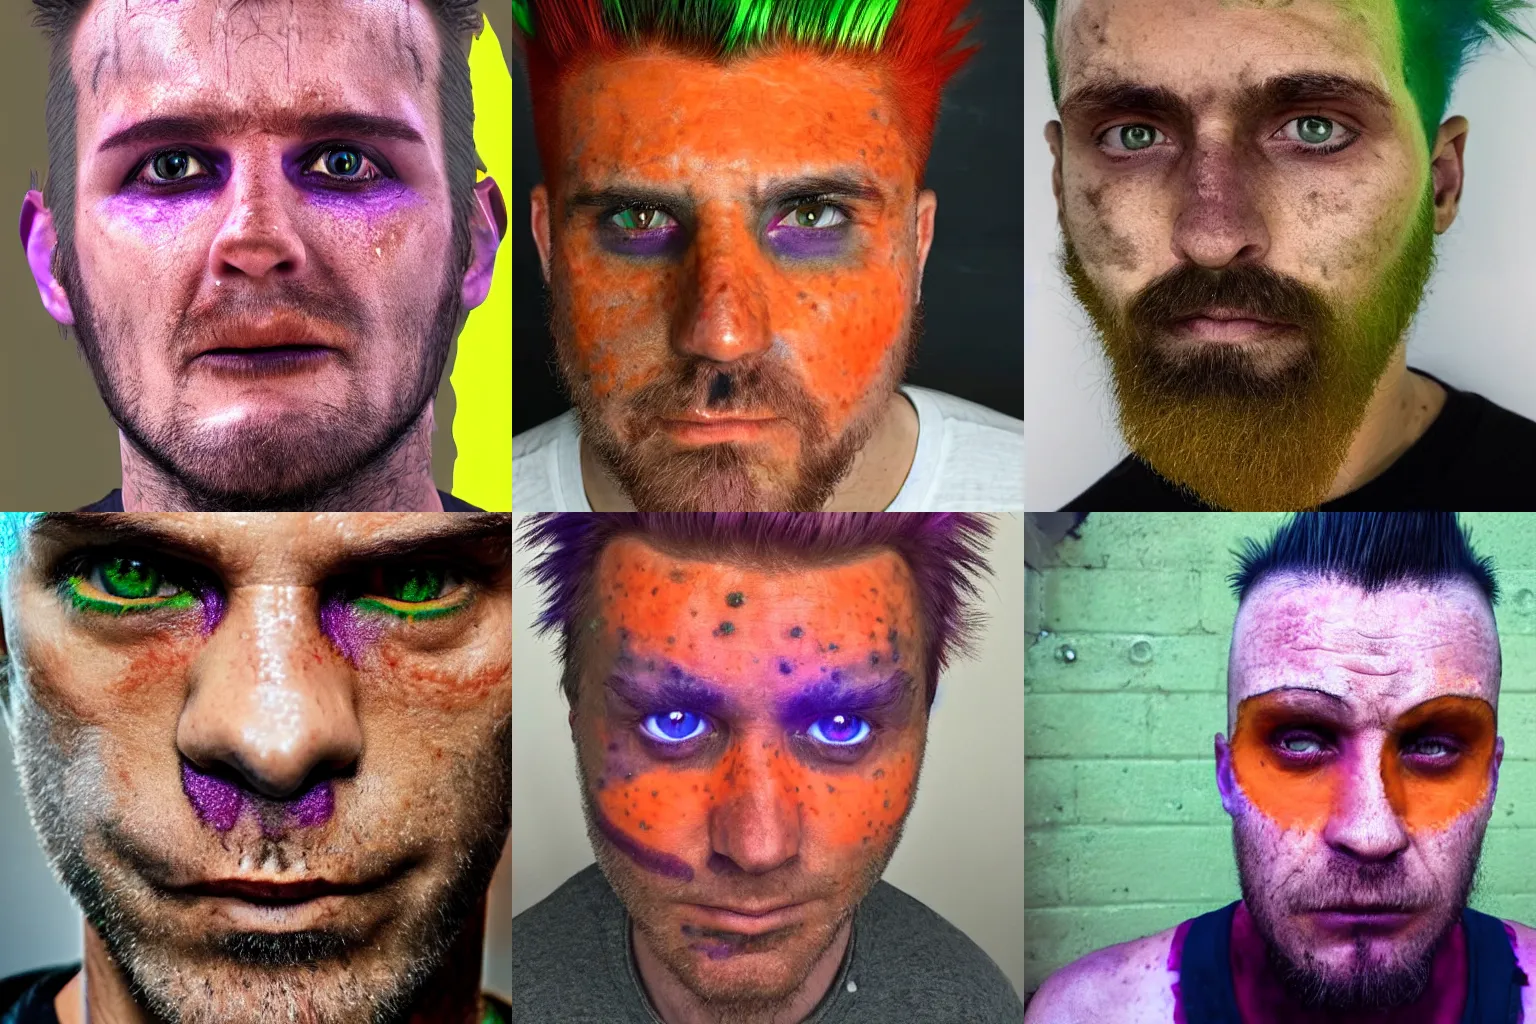 Prompt: a close up of a man's face with orange skin, green eyes, and purple hair styled in a mohawk. He also has a metal plate on his forehead with two red lights in the center